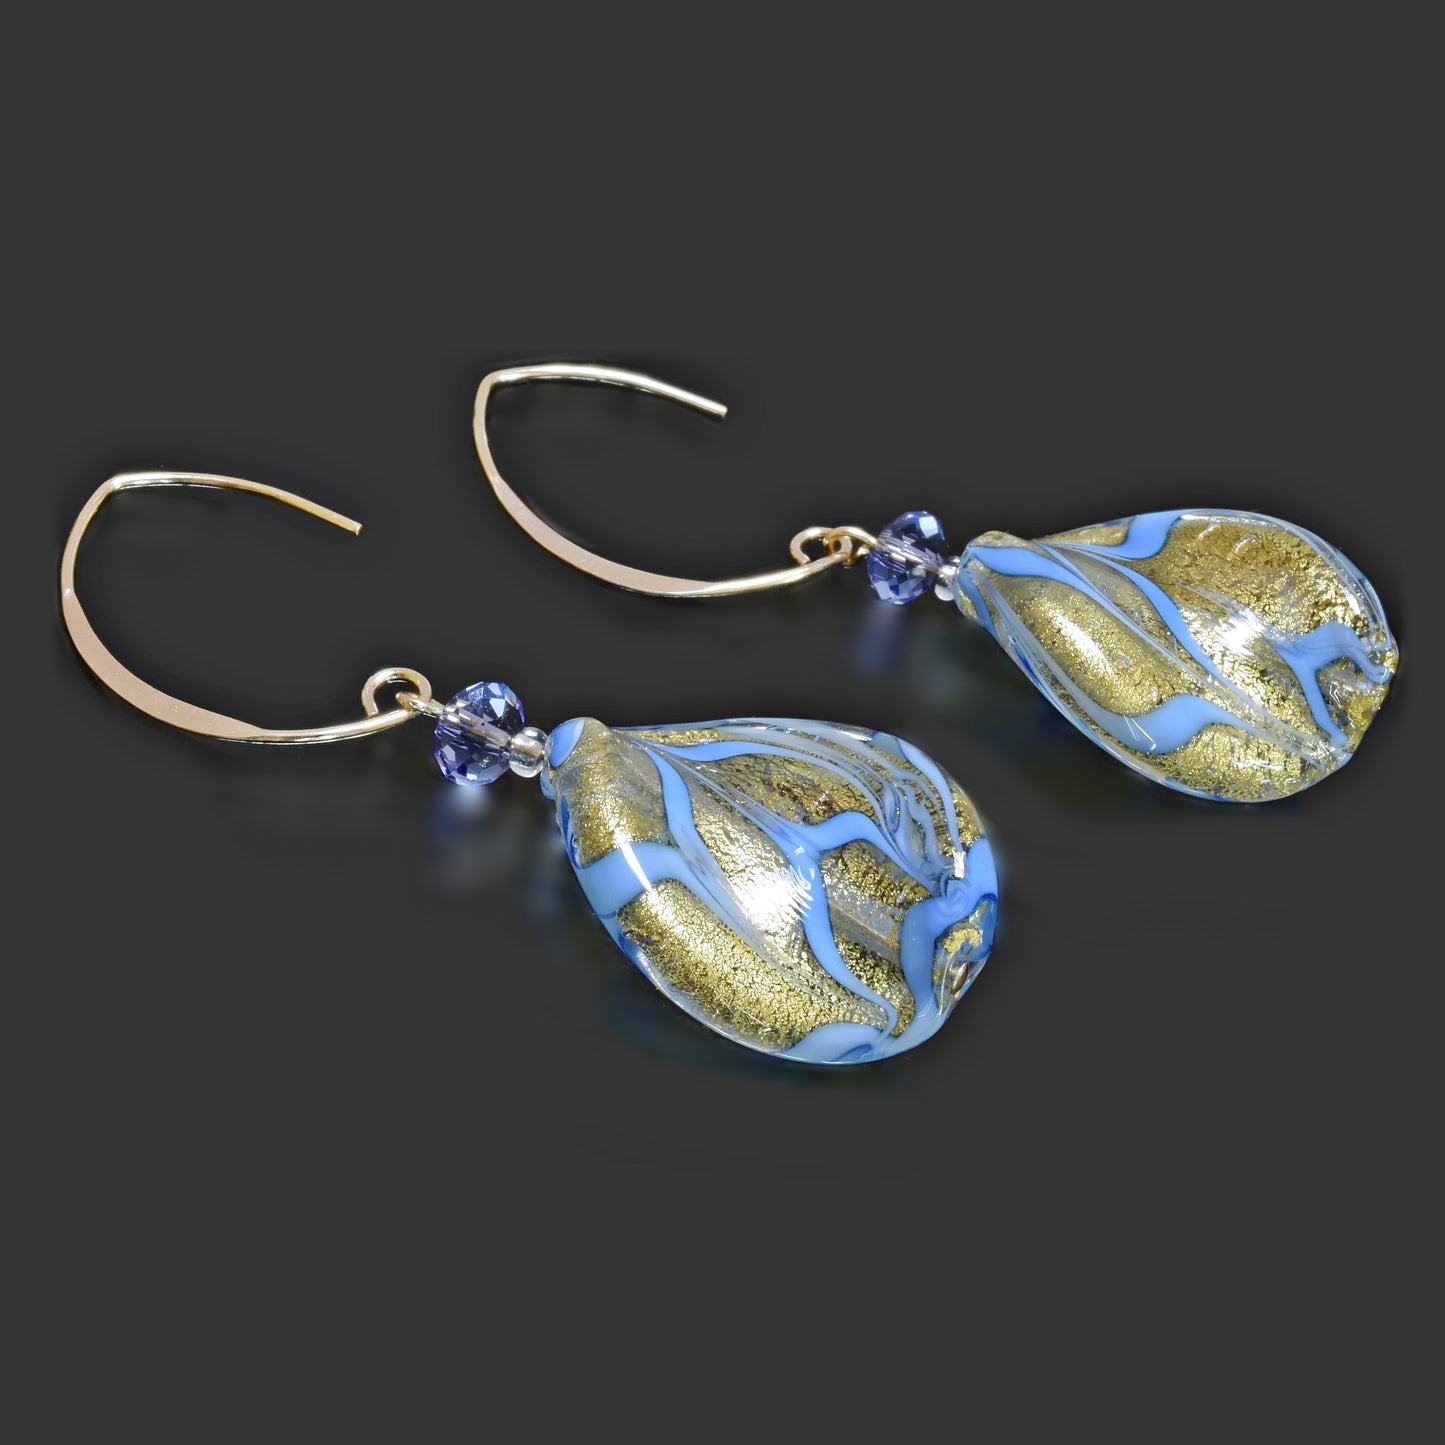 Gold-Filled Drop Earrings with Blue & Gold Venetian Beads and Swarovski Crystals Gold Filled 